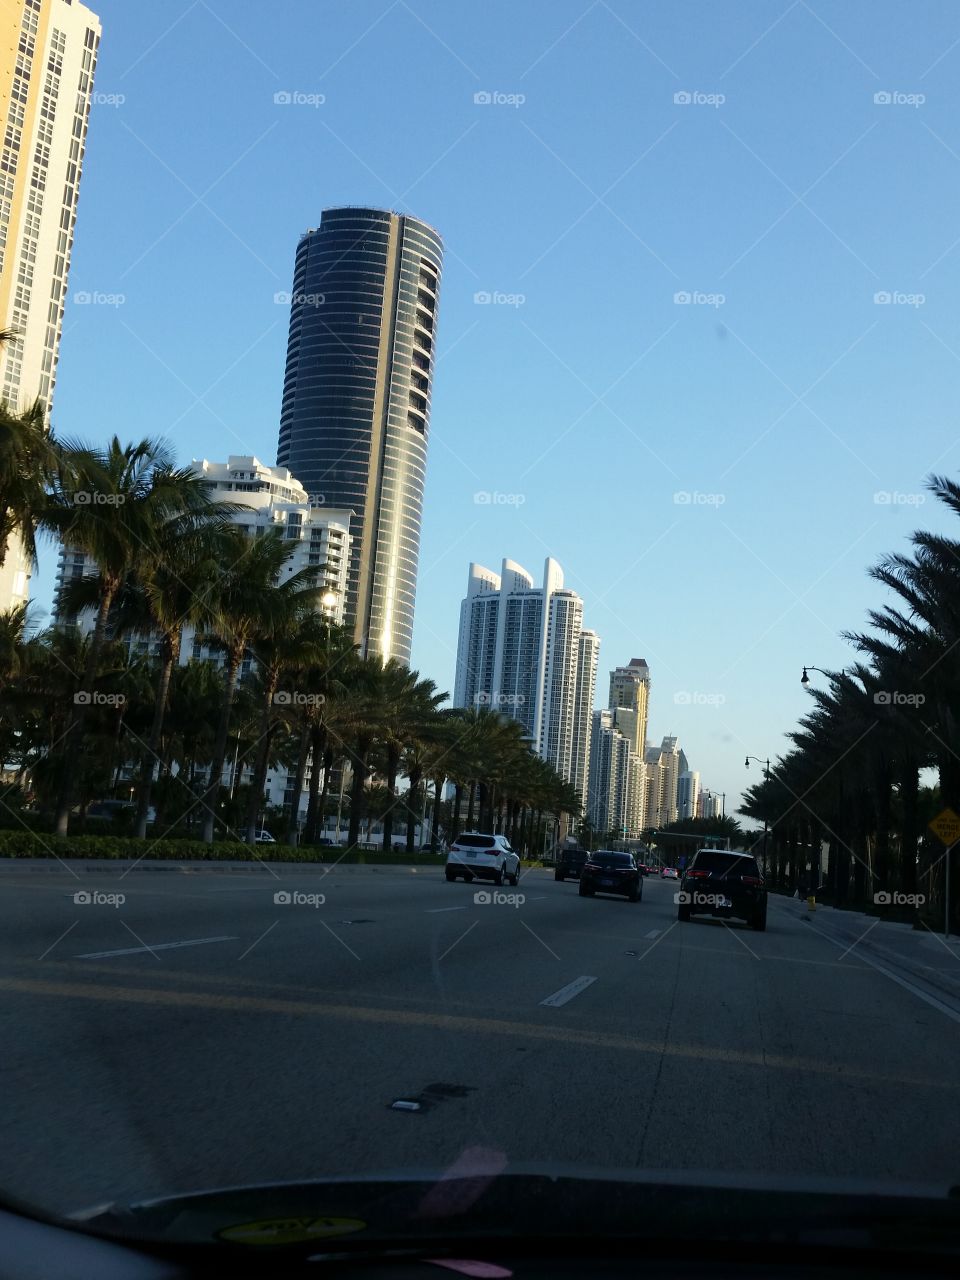 On our way to North Miami Beach , a cluster of condos with a fantastic view of the atlantic ocean